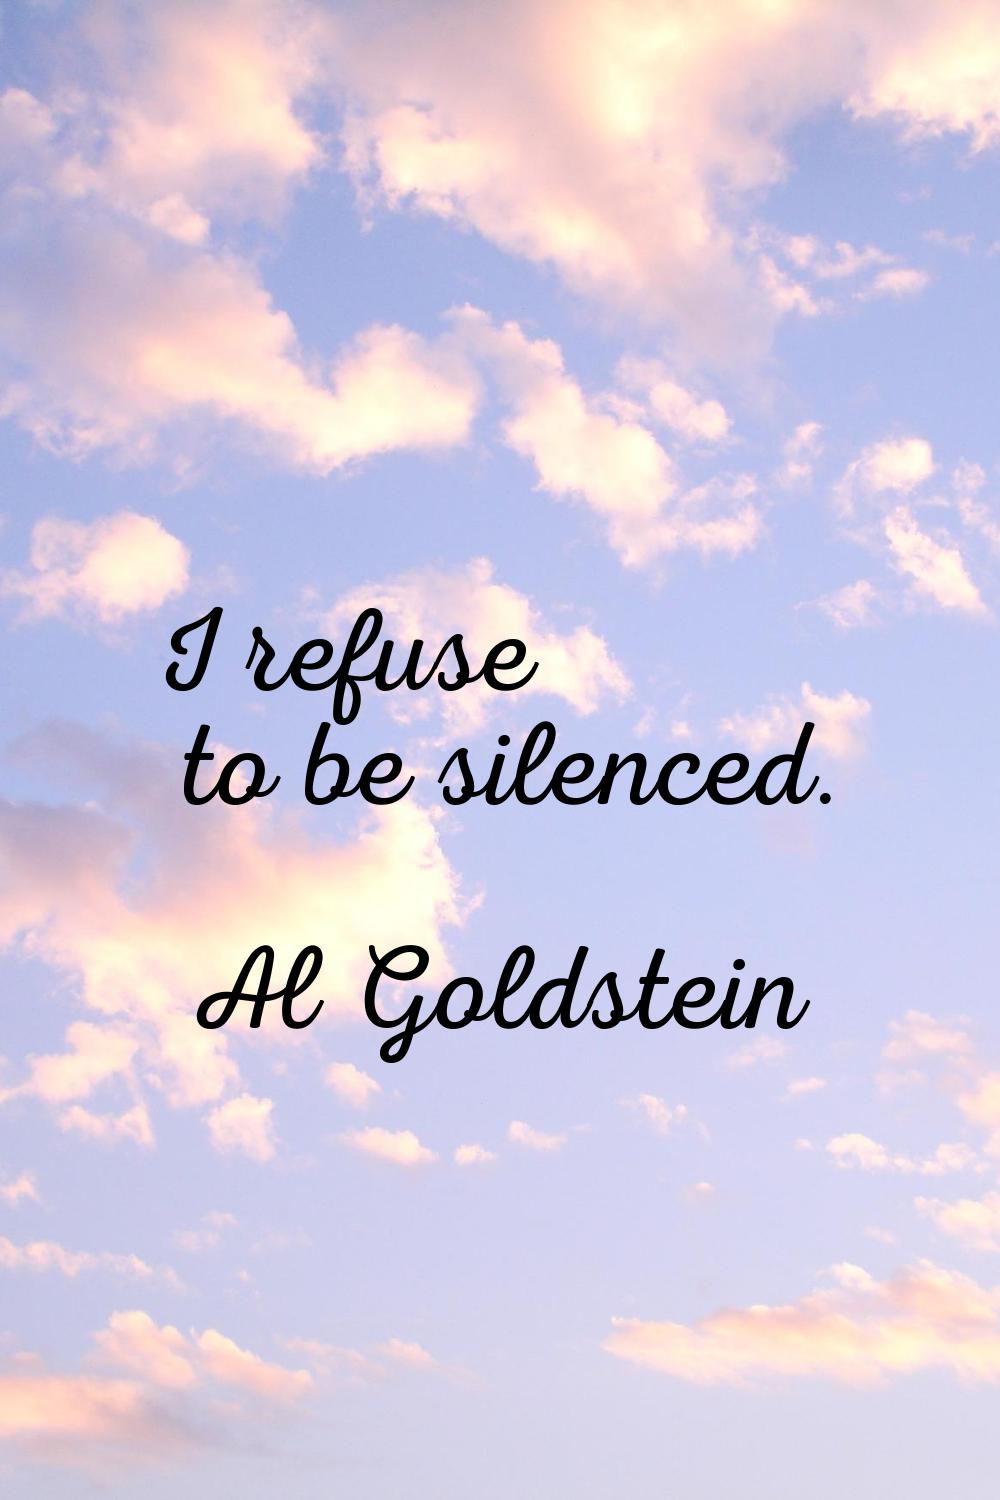 I refuse to be silenced.